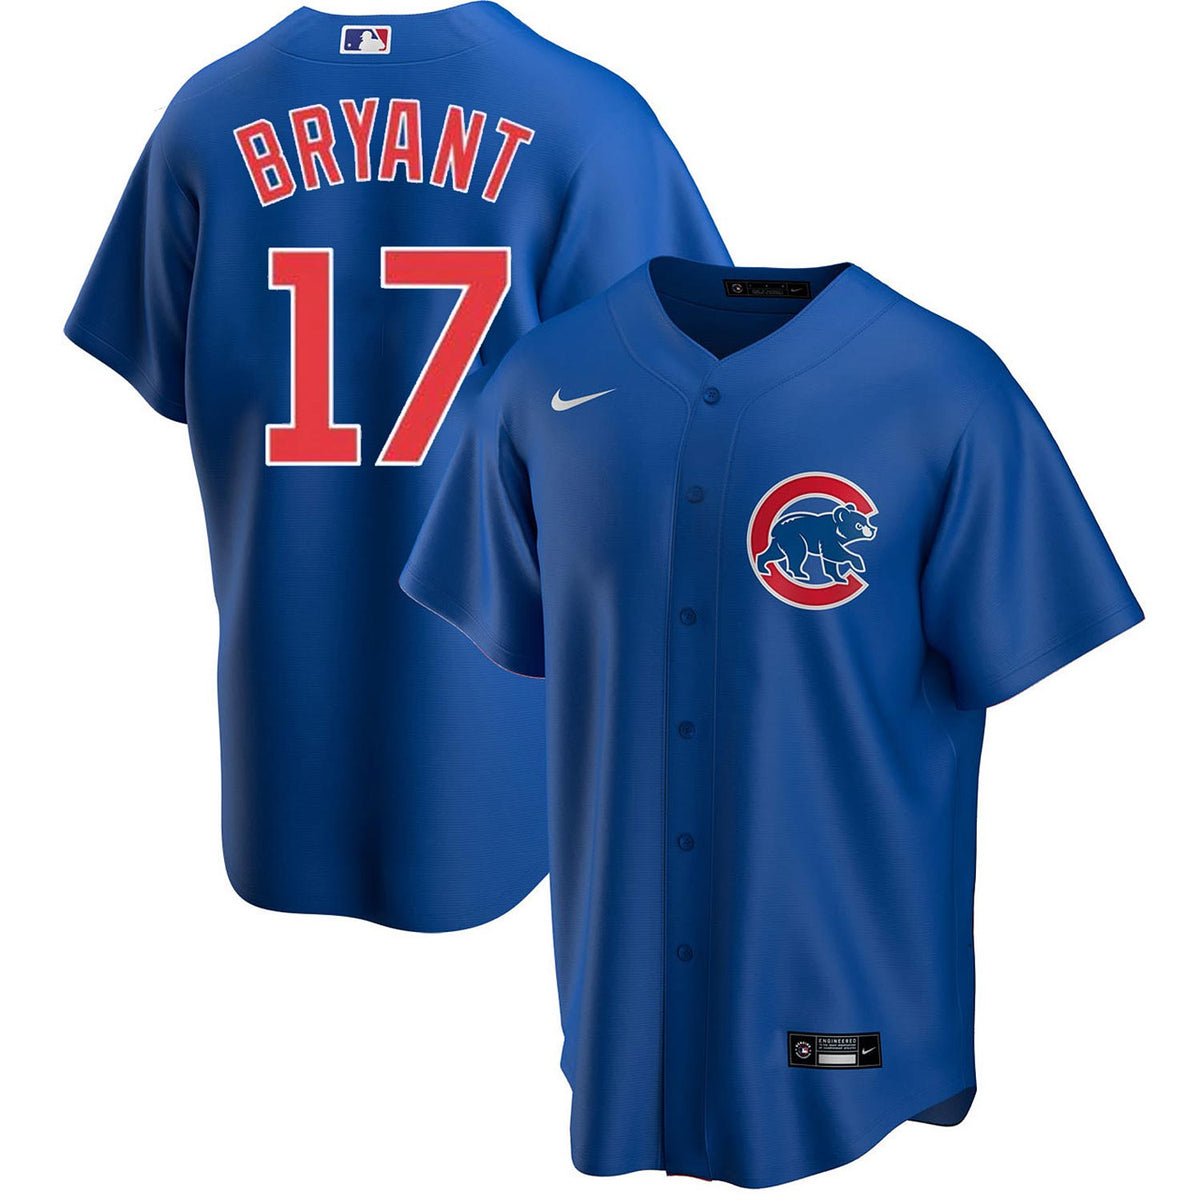 Kris Bryant Chicago Cubs Jersey S – Laundry